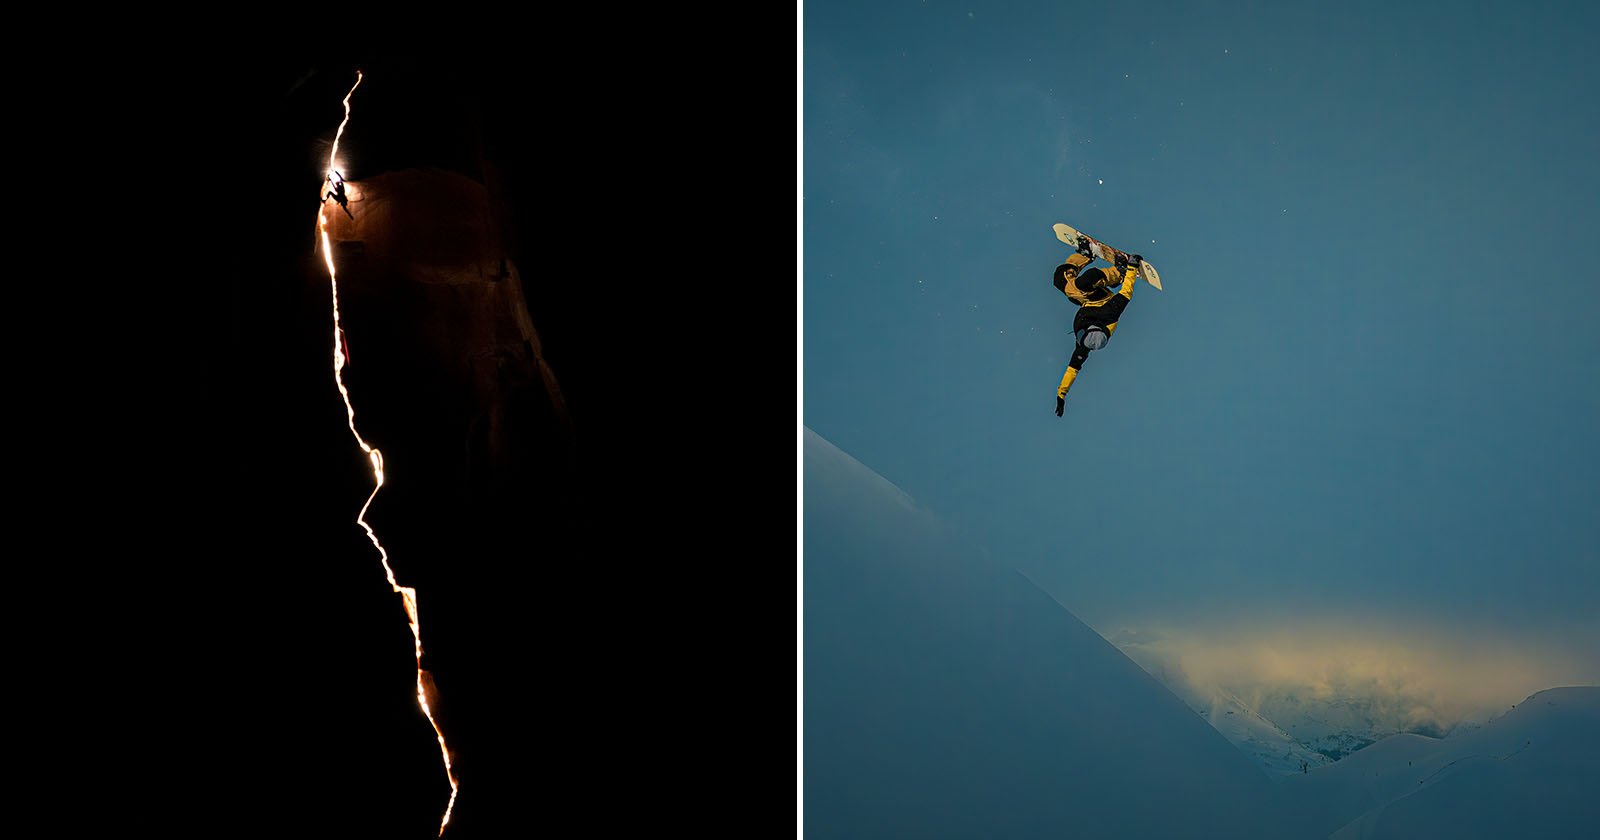 Jaw-Dropping Climber Portrait Wins Red Bull Illume Image Quest 2023 | PetaPixel